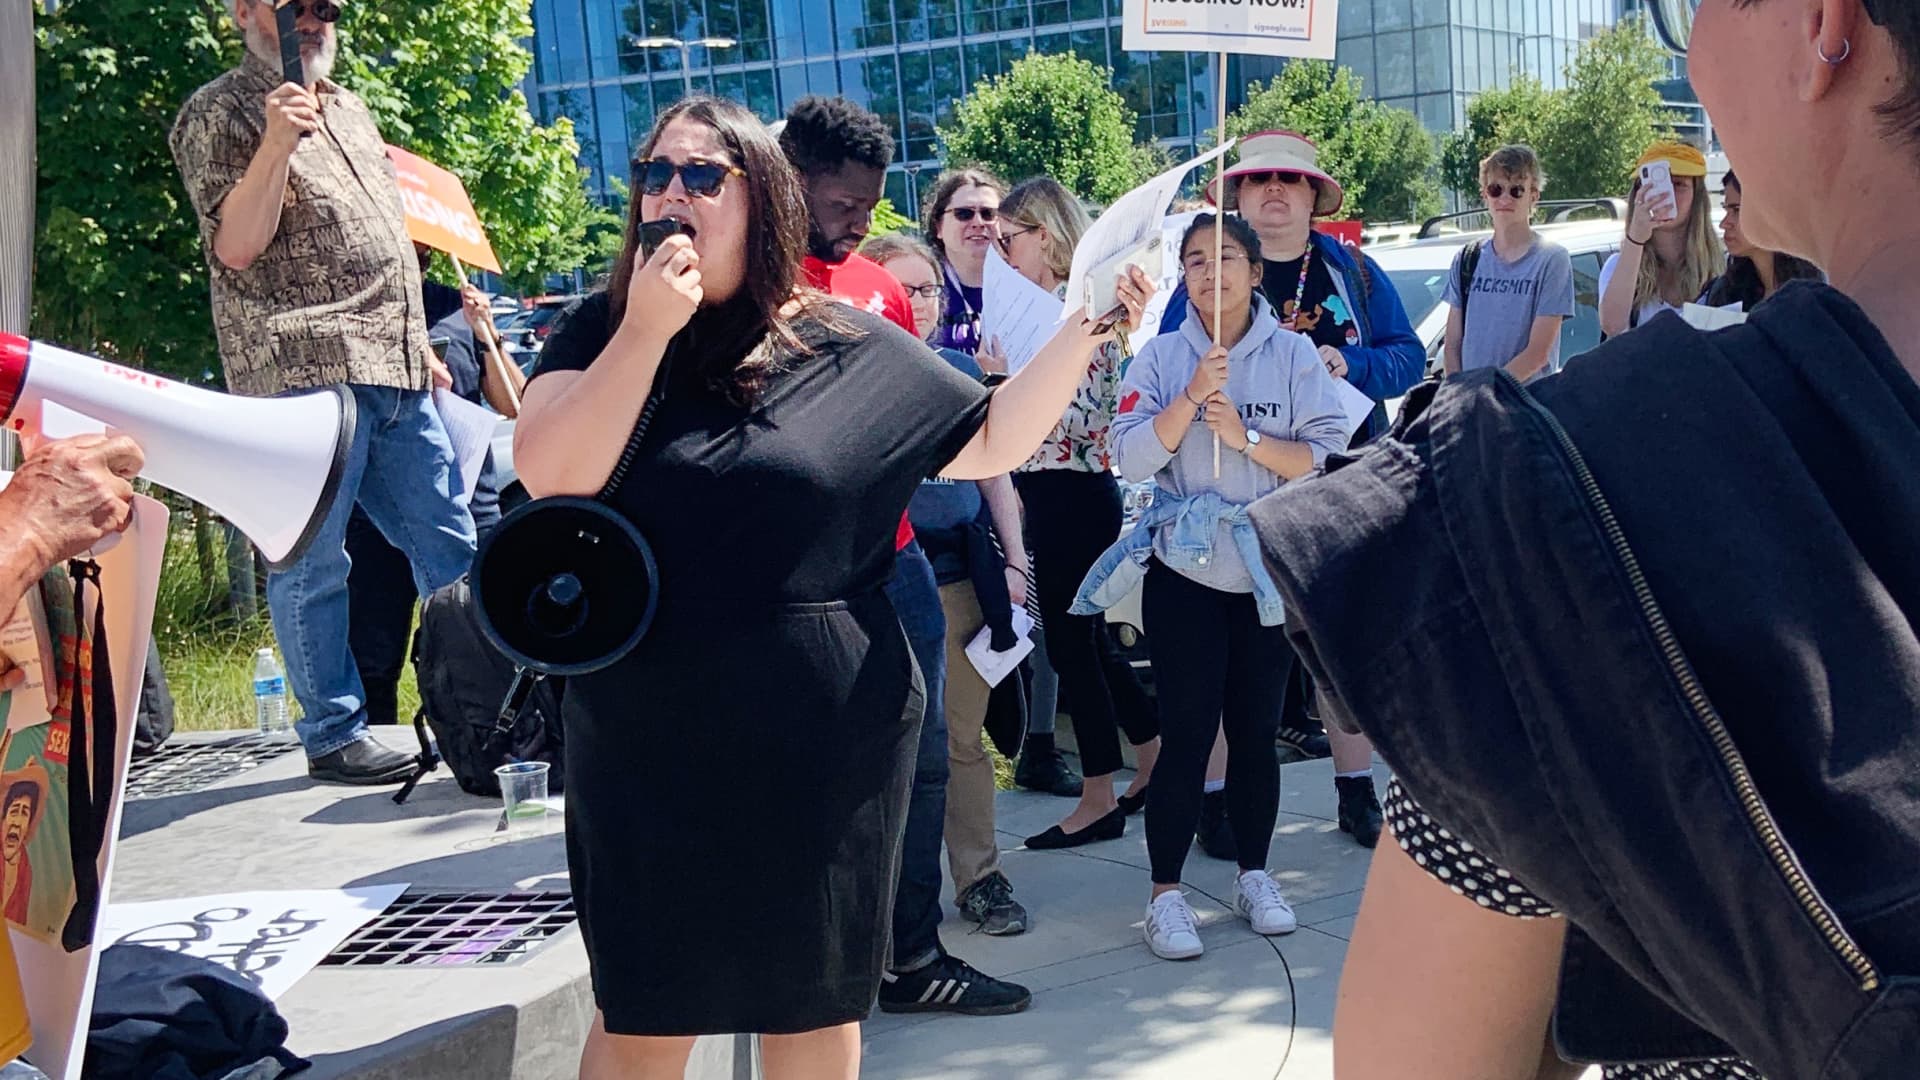 Silicon Valley Rising campaign lead Maria Noel Fernandez leads a protest at Google's 2019 shareholder meeting at company's campus in Sunnyvale, California.